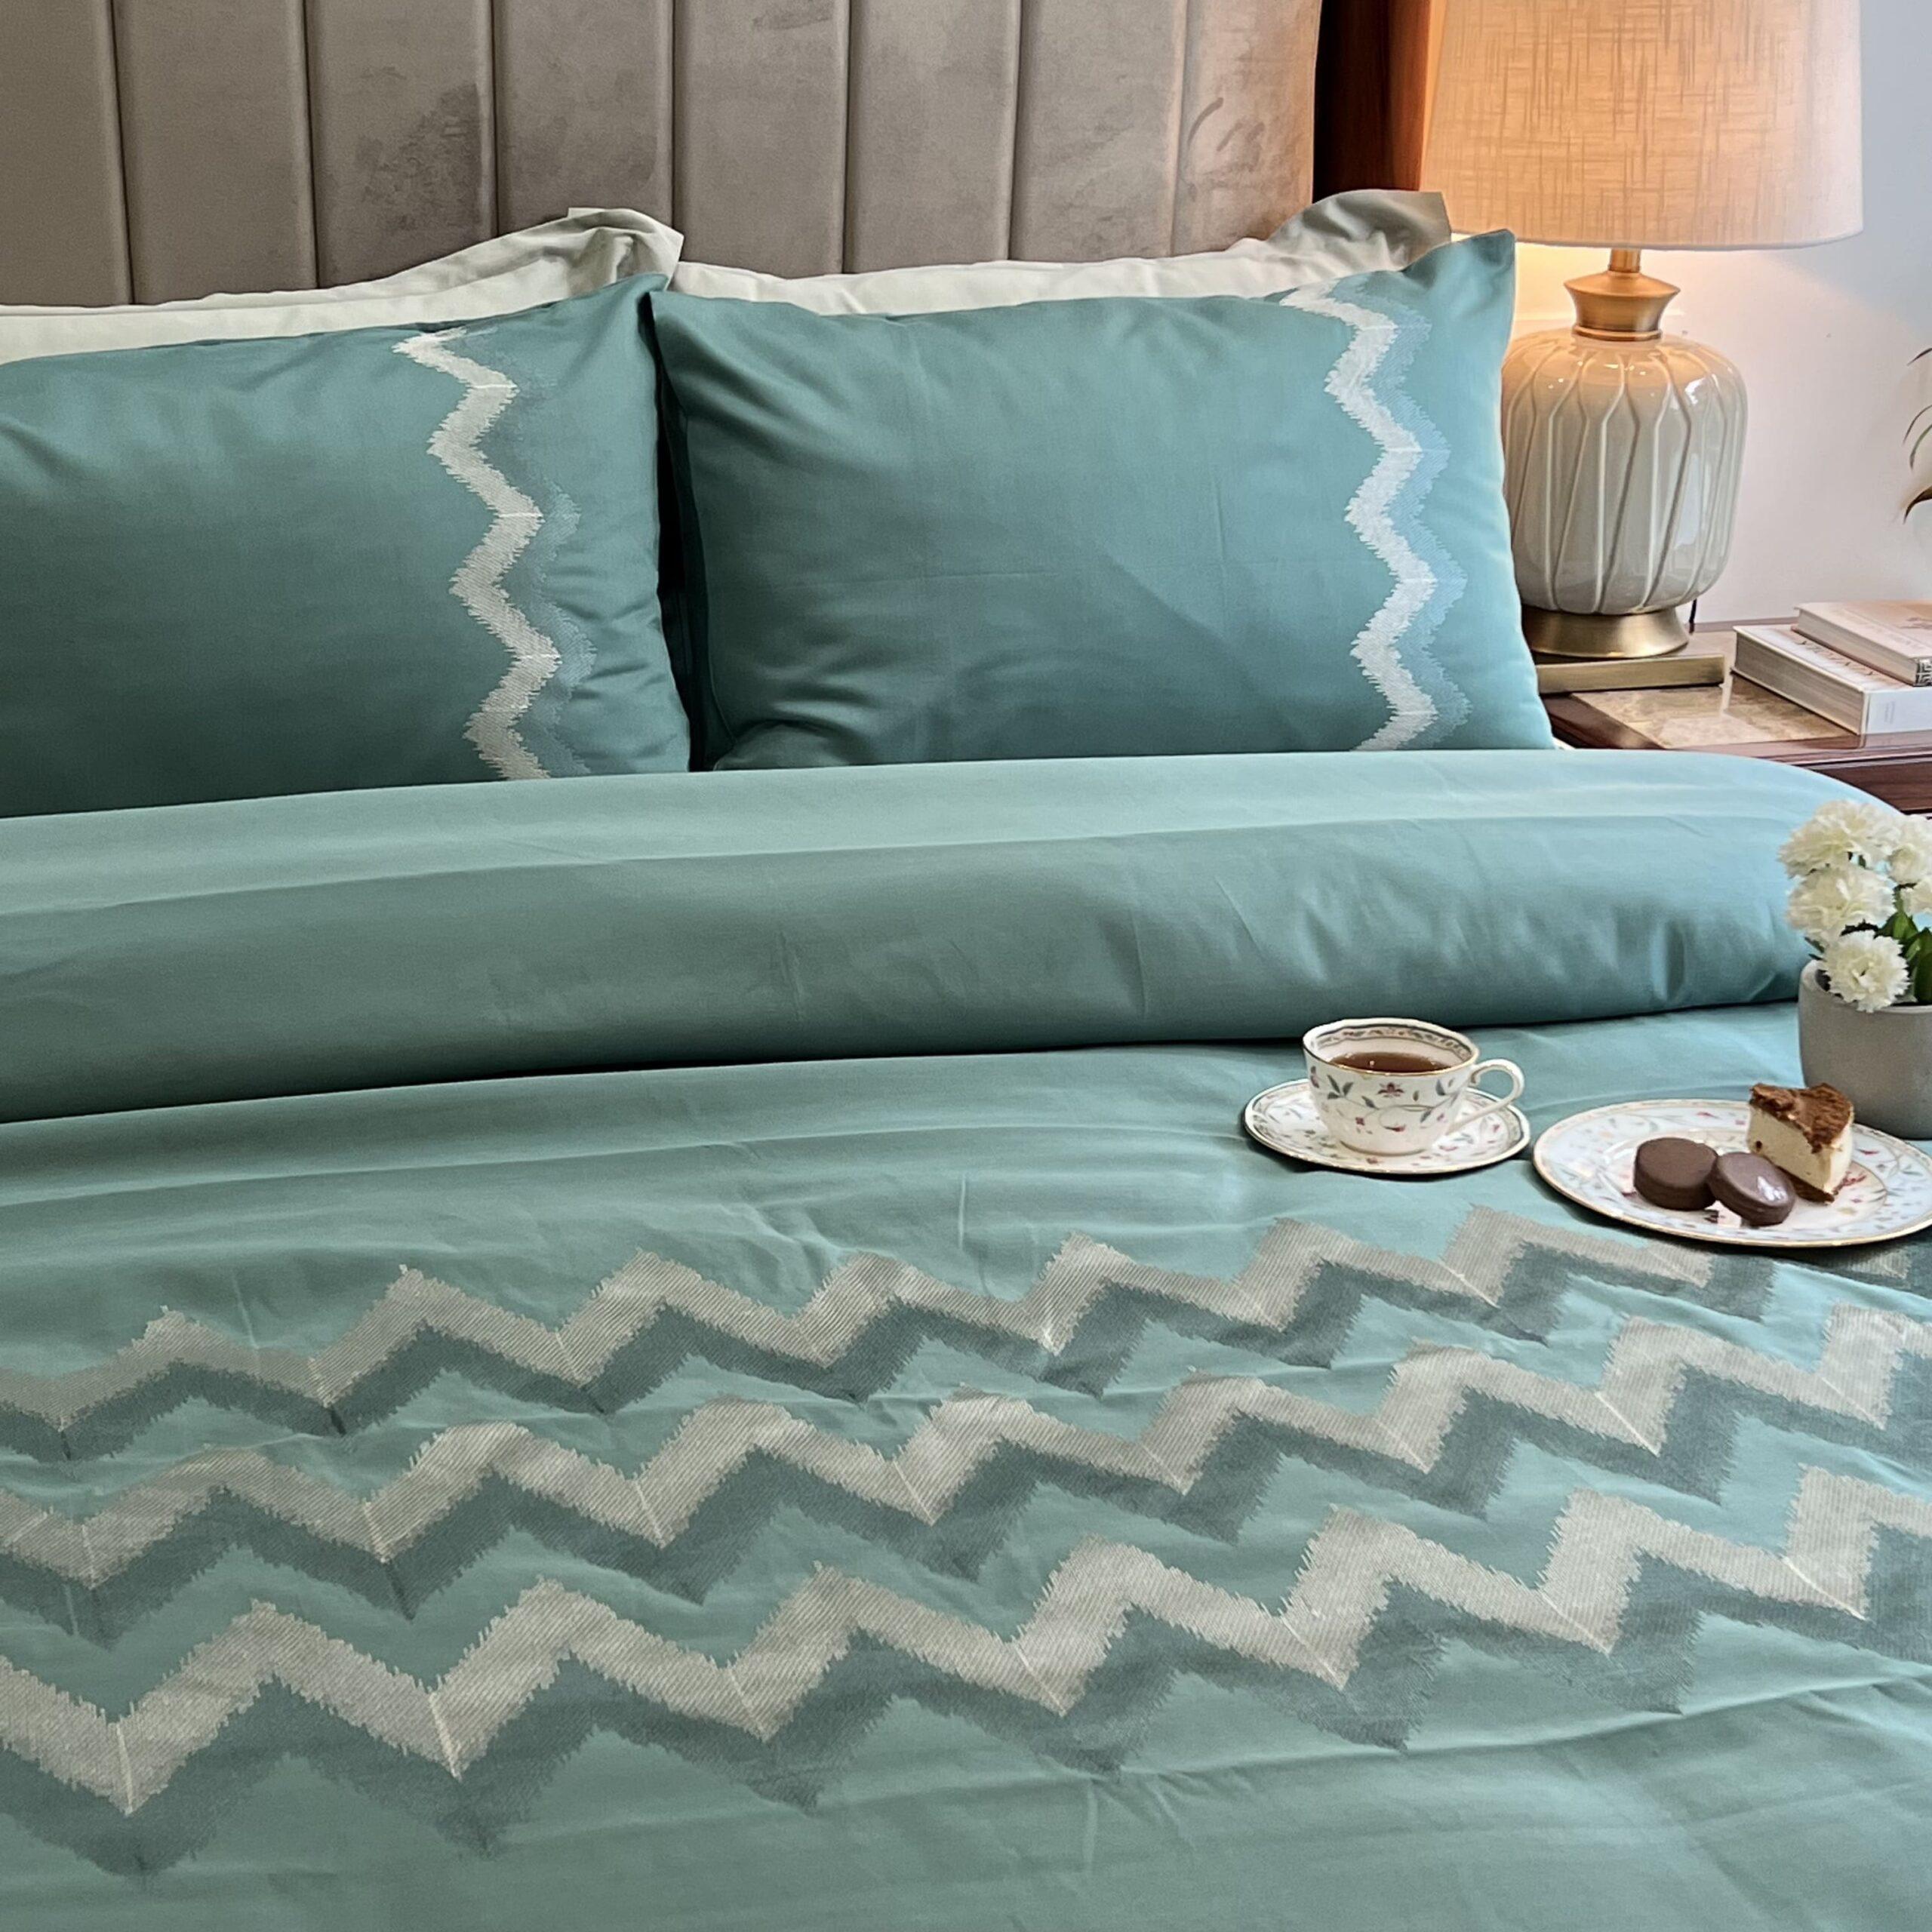 Crest Turquoise Syona Duvet Cover Set